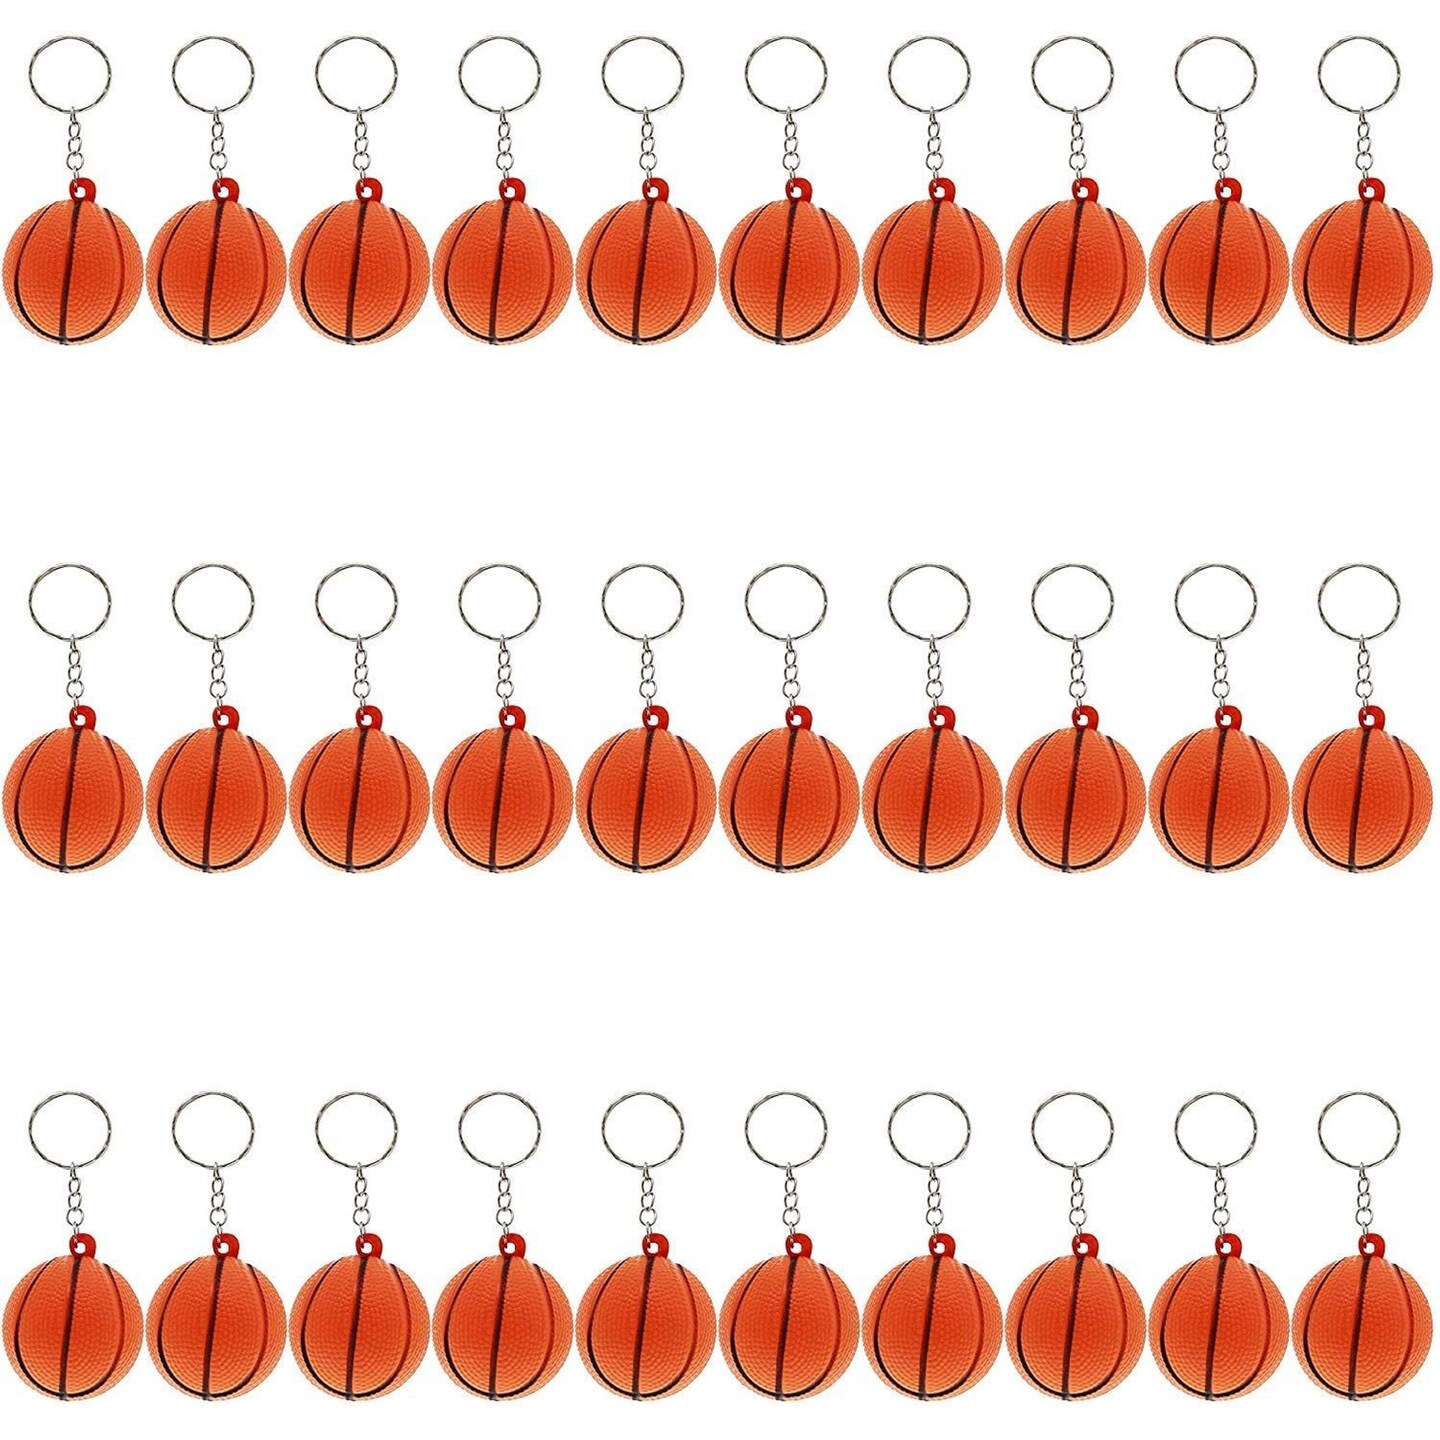 Juvale 30 Pack Mini Basketball Foam Sports Ball Keychain for Relieve Stress and Anxiety, Kids Party Favors